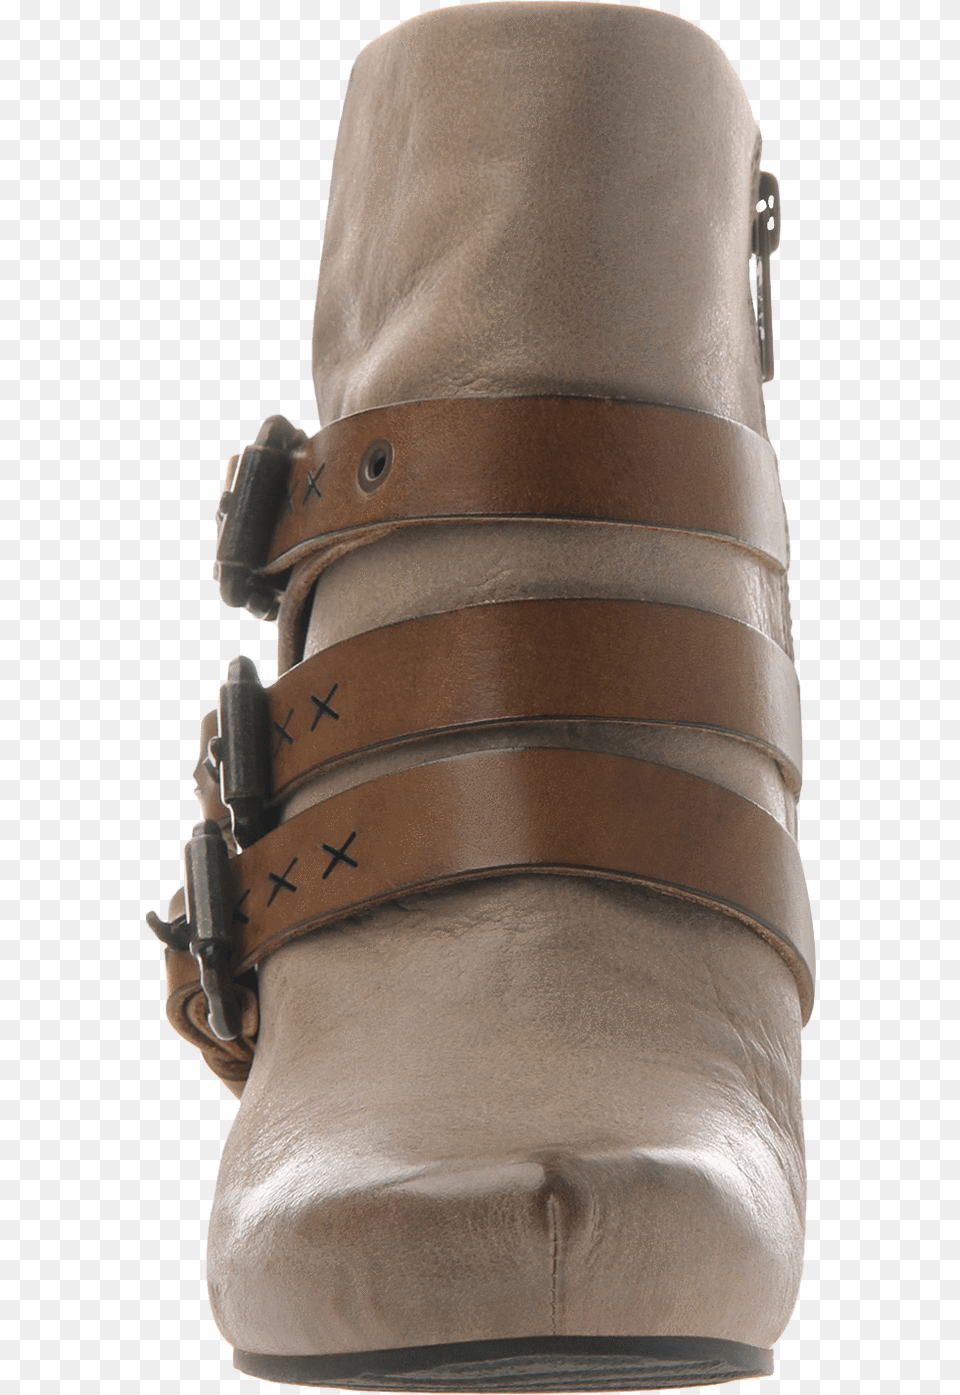 Lasso Women S Ankle Boots In Pecan Front Viewclass Ankle Boots Front View, Accessories, Helmet, Belt, Buckle Png